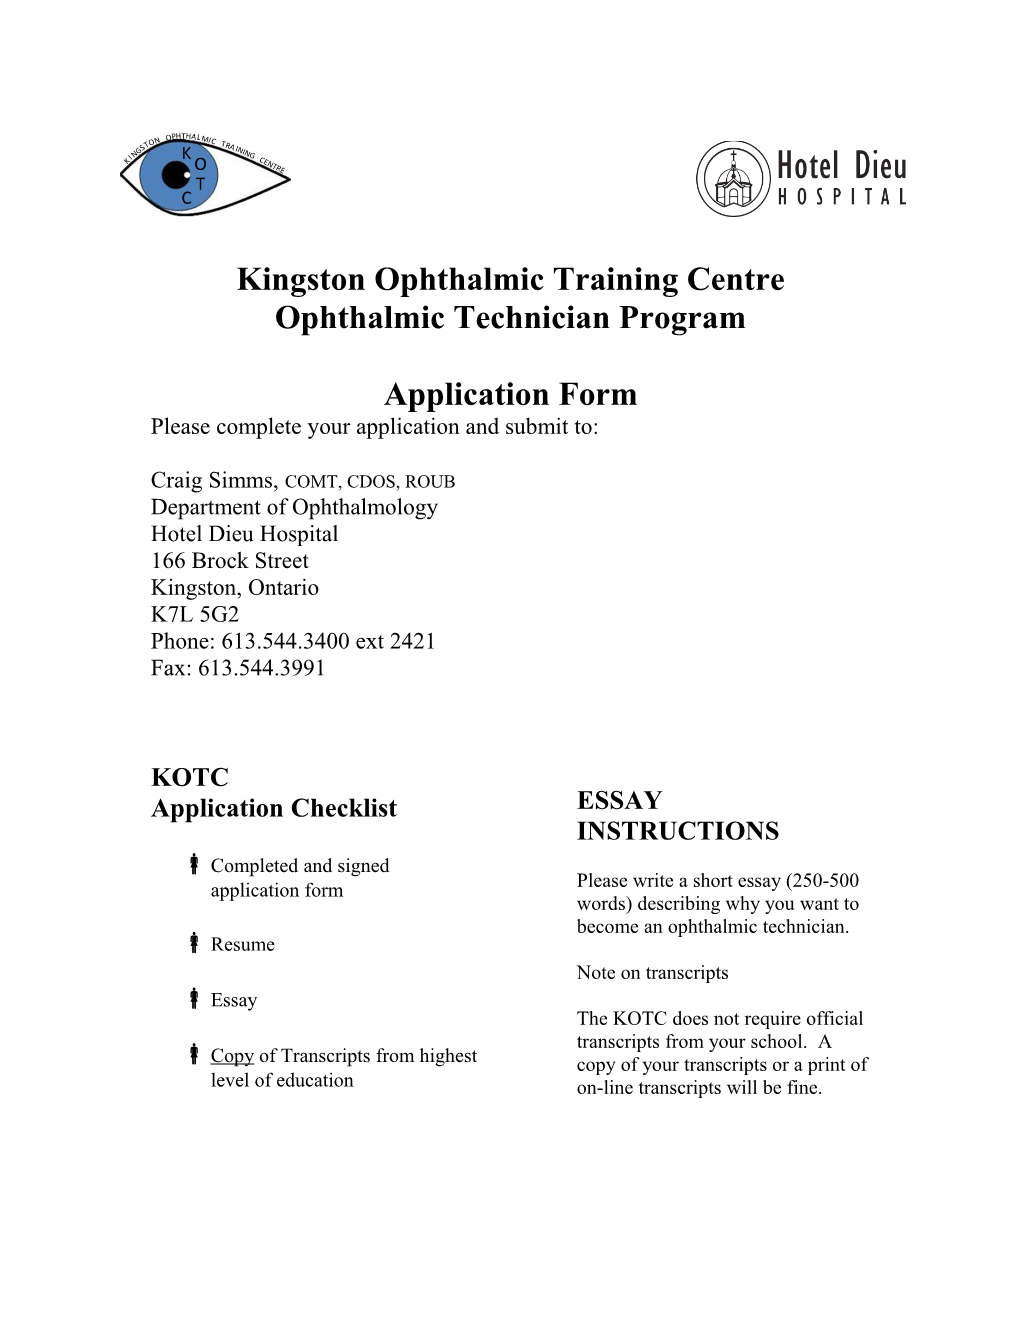 Kingston Ophthalmic Training Centre Ophthalmic Technician Program